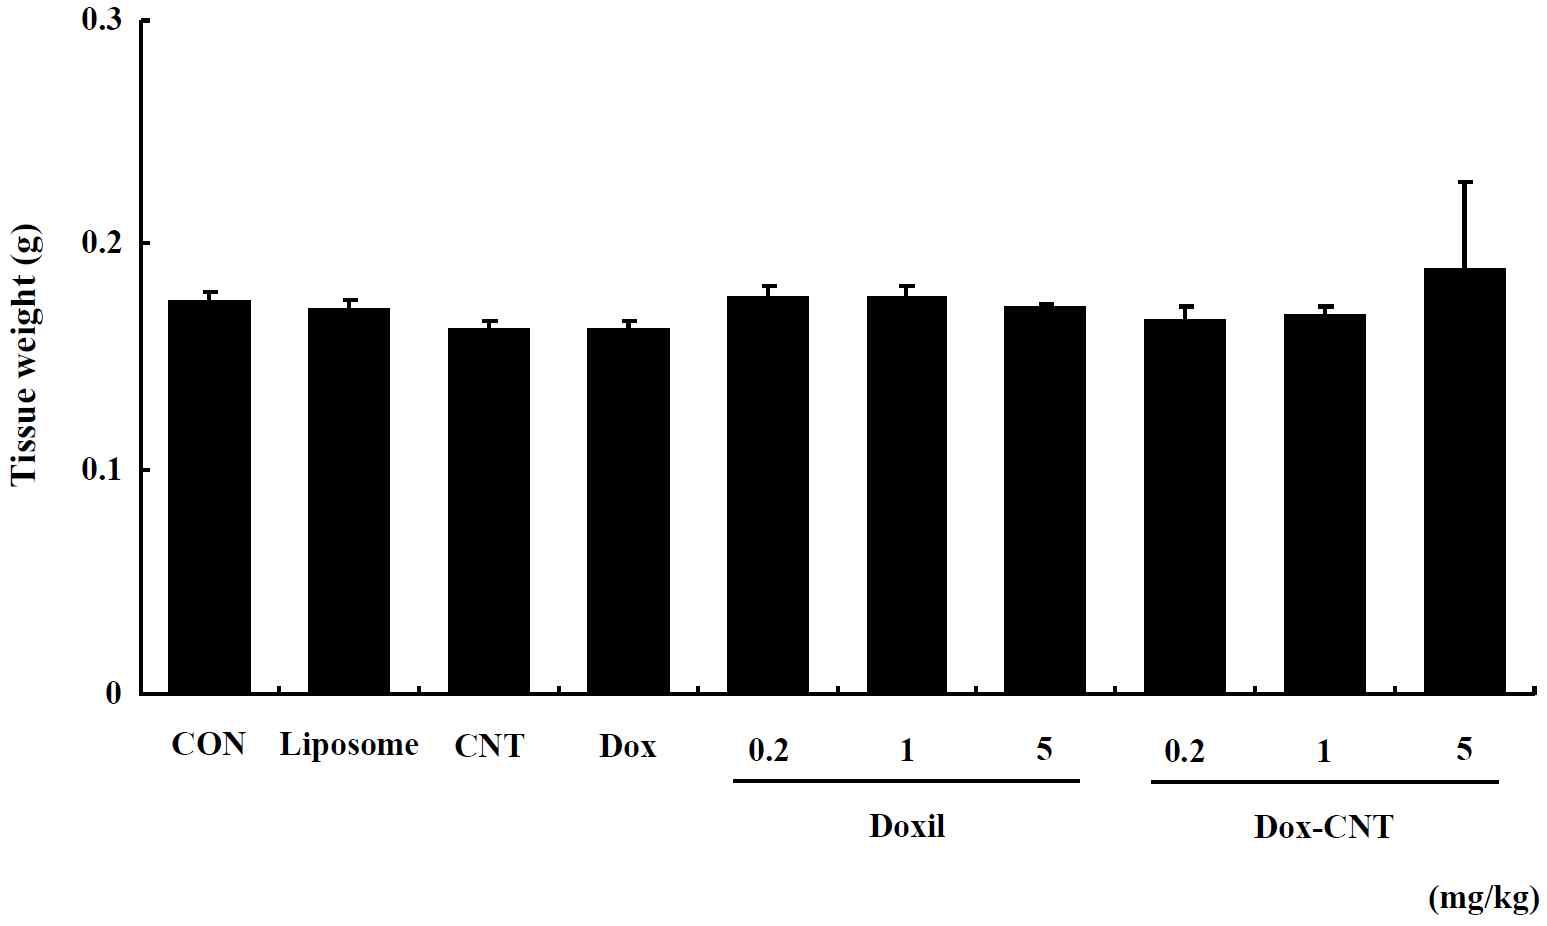 The change of Lung weight in single exposed female ICR mice for 14 days. Mice were respectively administered by intravenous injection with liposome, CNT, Dox, Doxil (0.2, 1, 5 mg/kg) and Dox-CNT (0.2, 1, 5 mg/kg). The results are presented as mean ± SE (n = 10). * p < 0.05, significantly different from the control.